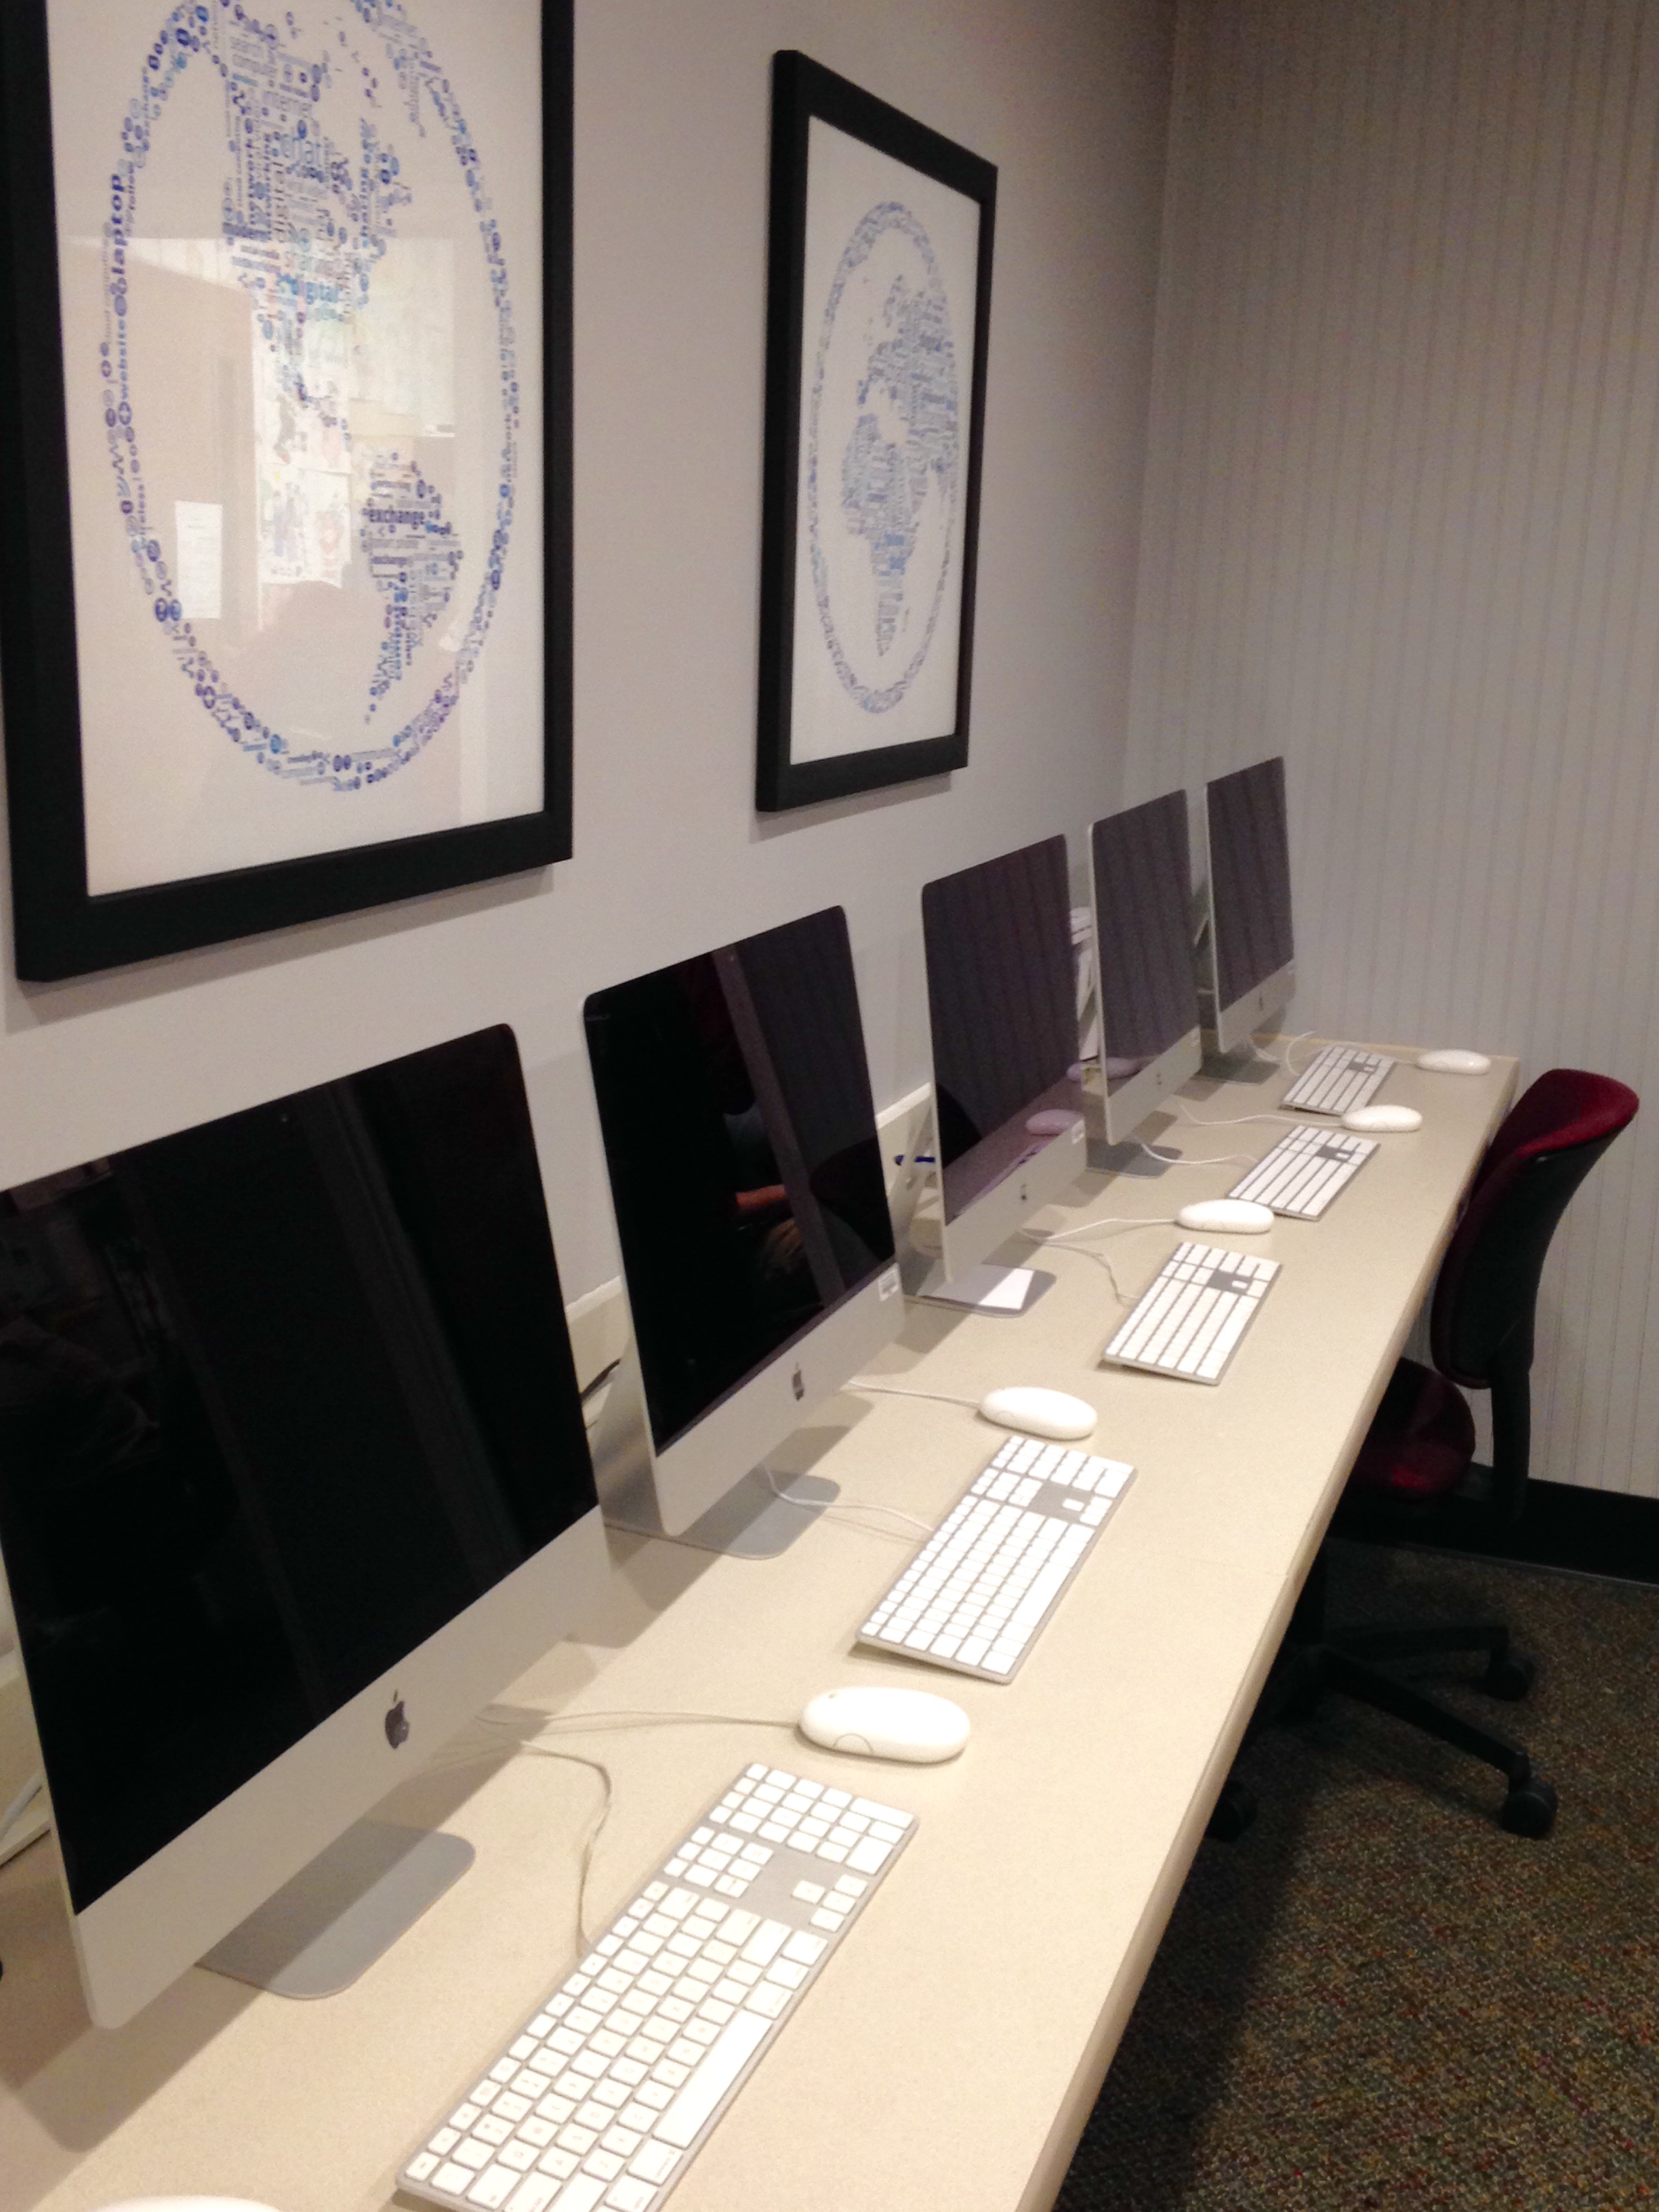 Students have access to iMac computers where they can write, edit, and publish news stories.&nbsp;